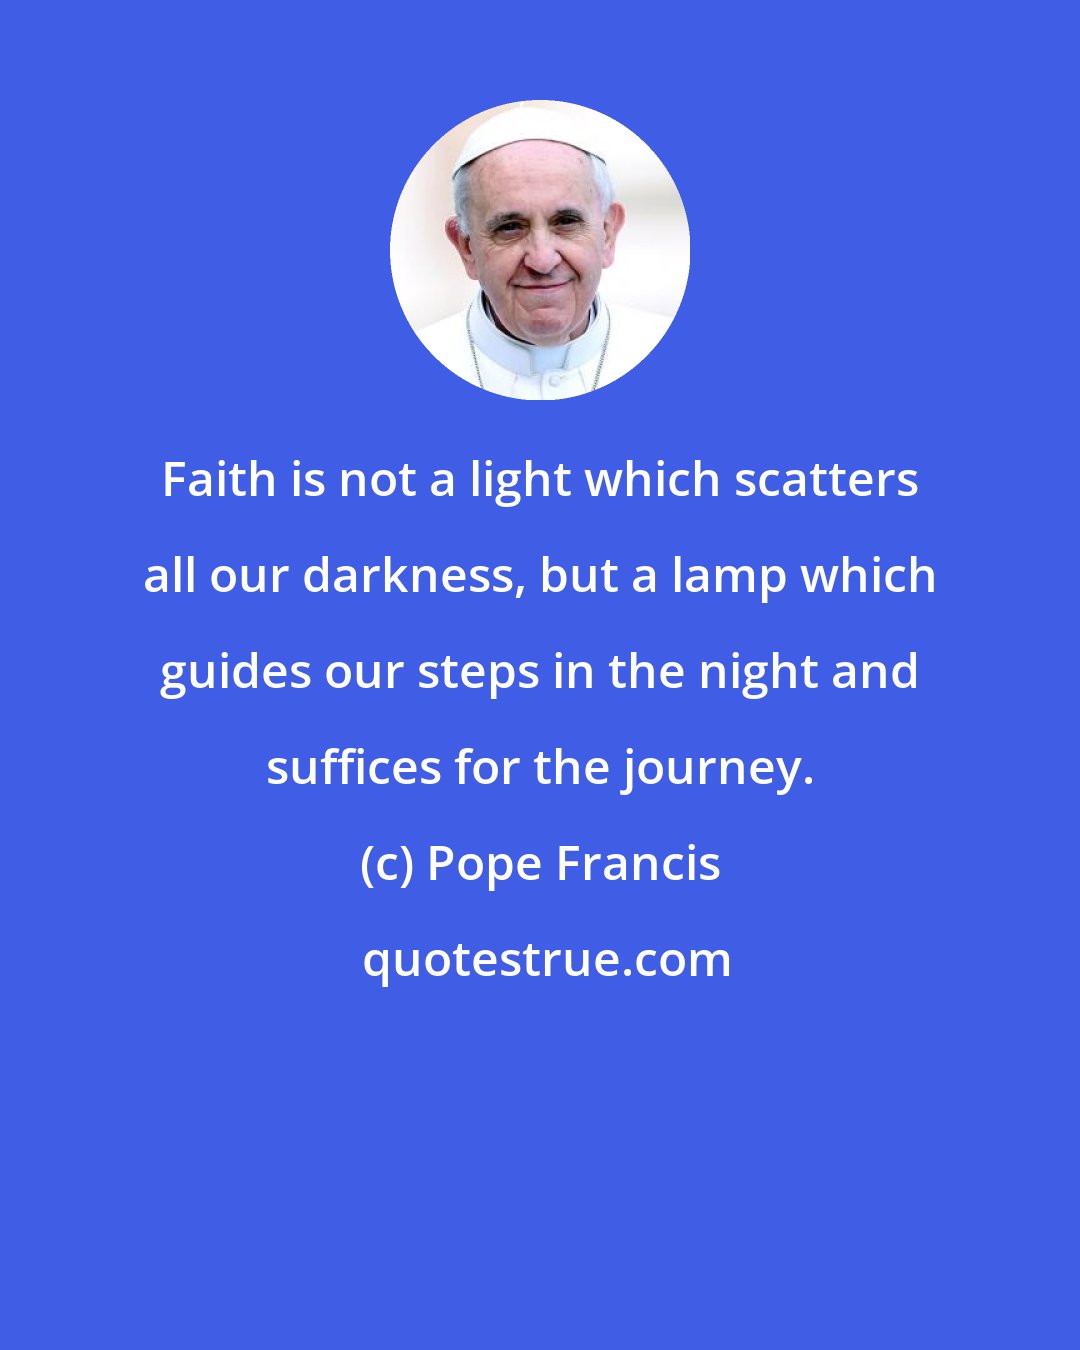 Pope Francis: Faith is not a light which scatters all our darkness, but a lamp which guides our steps in the night and suffices for the journey.